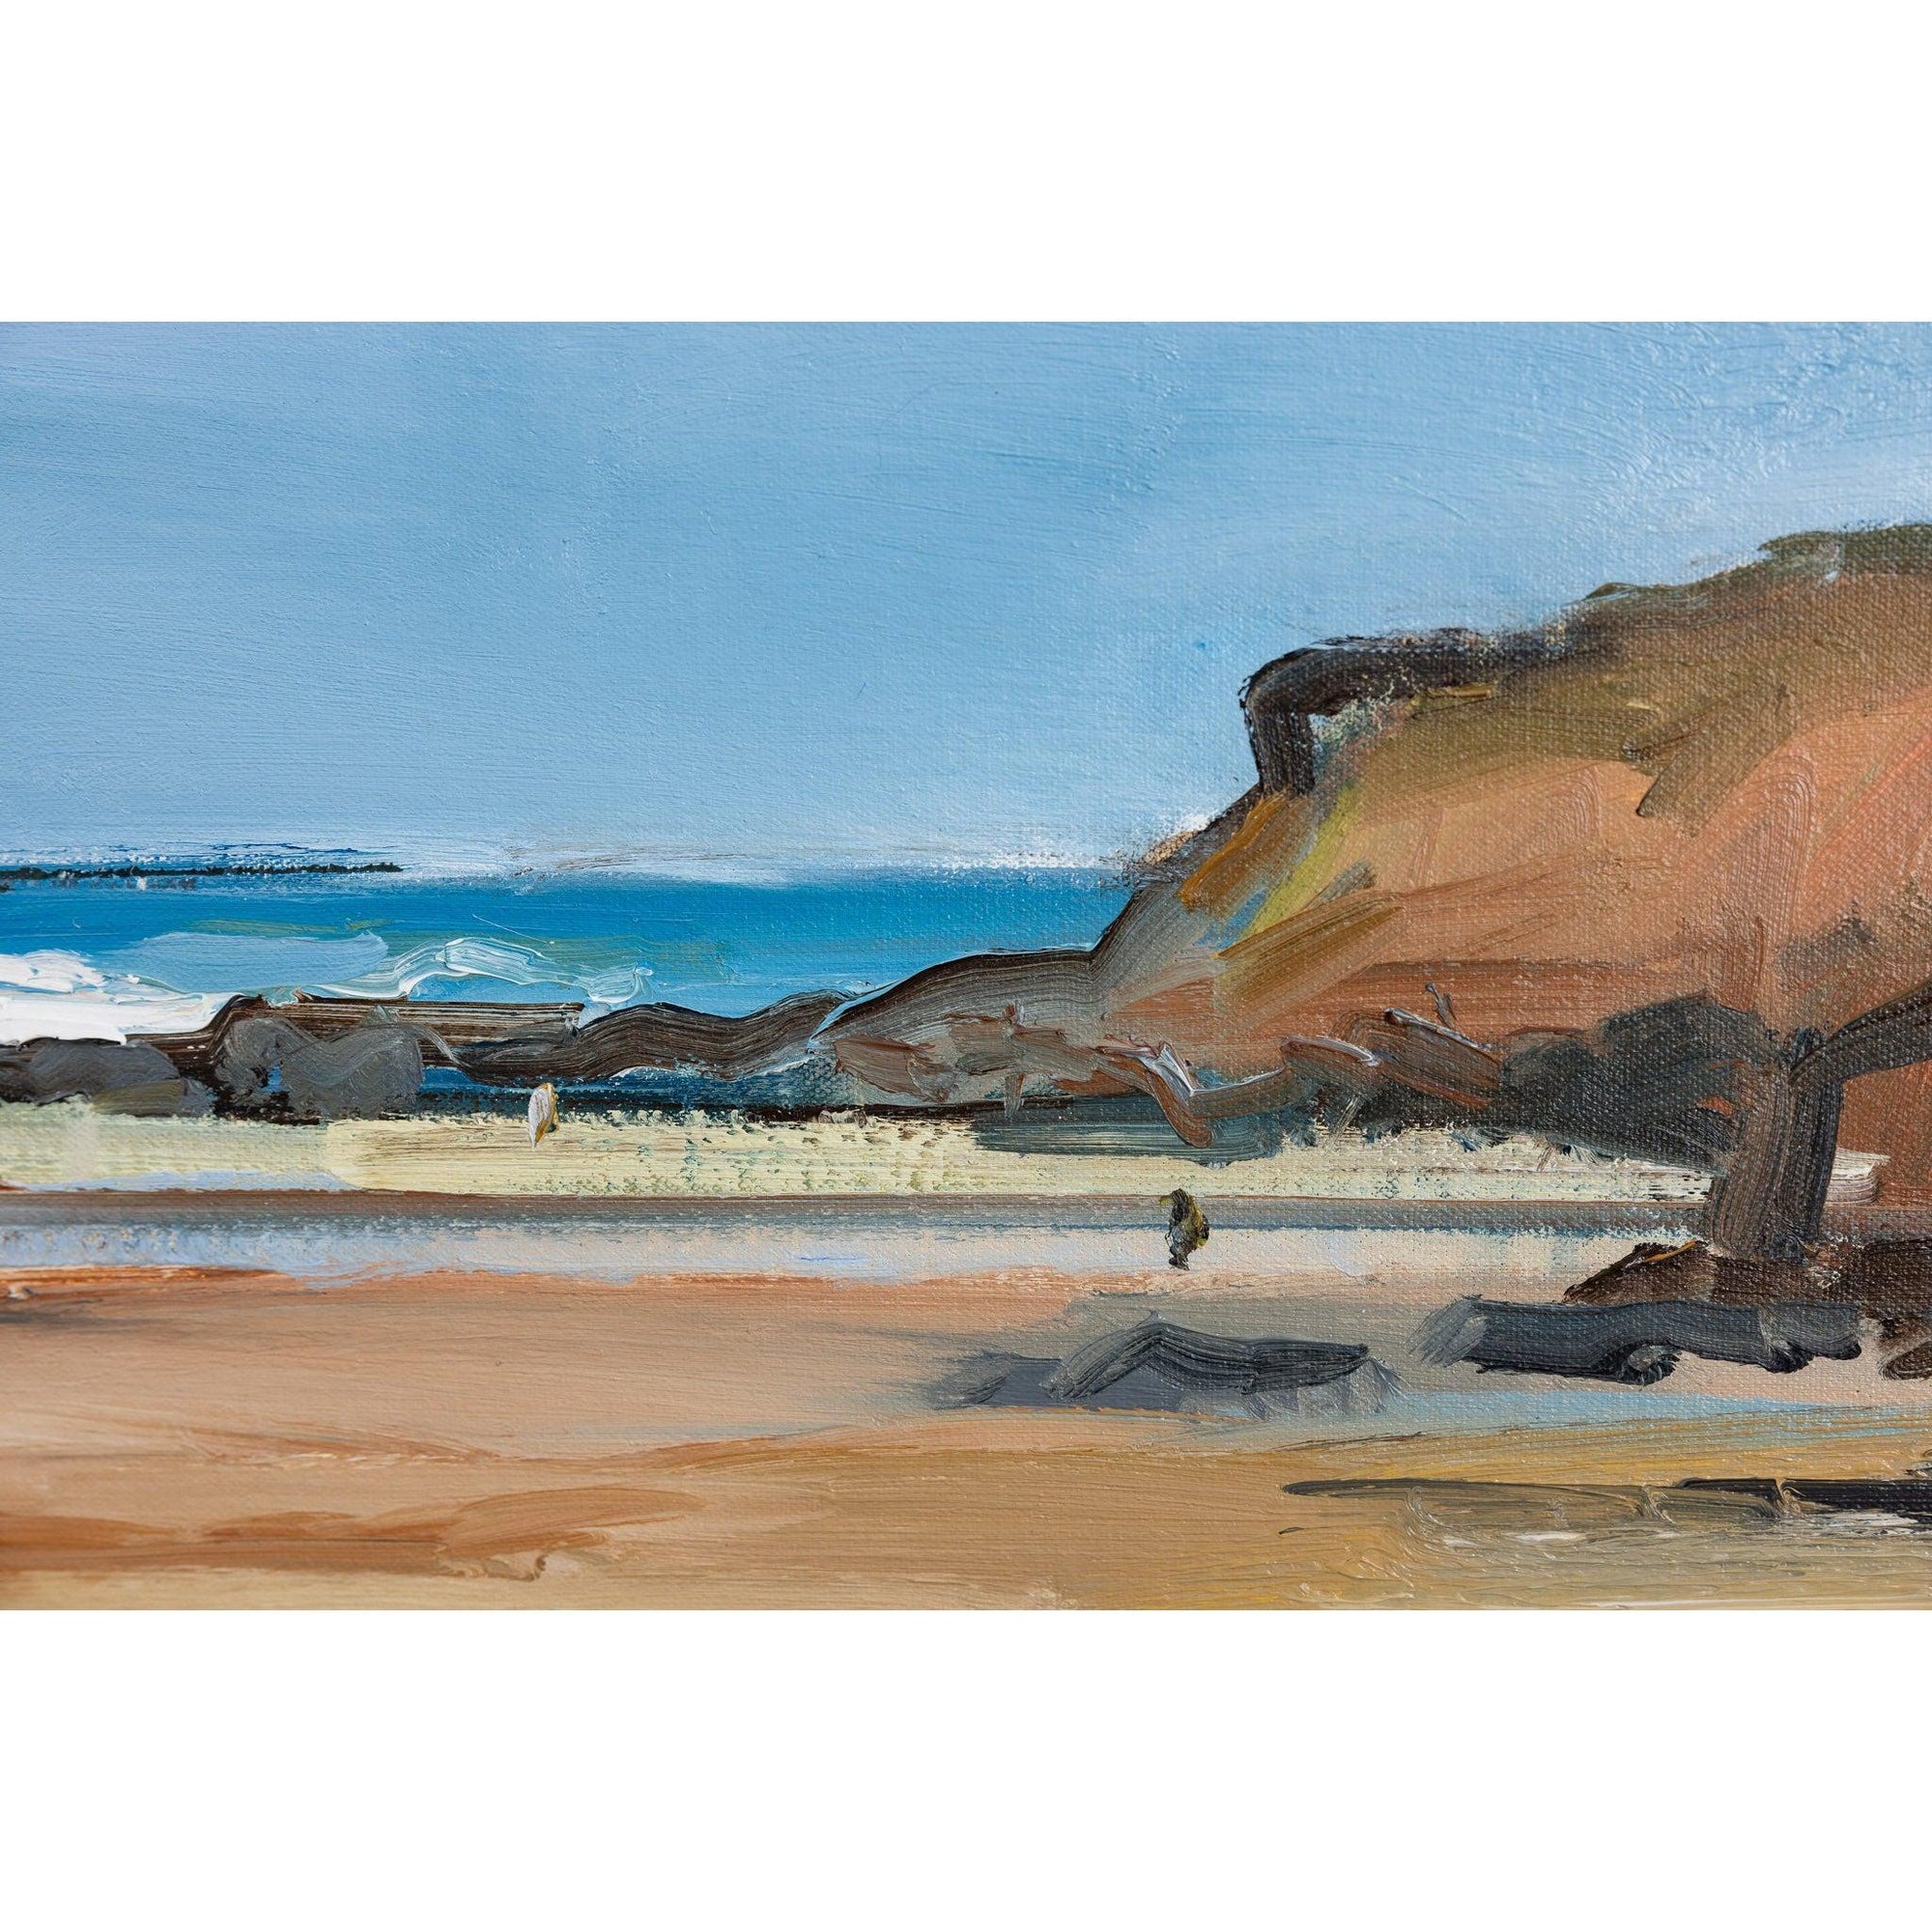 'The Sea And Sky, Trevone Beach' oil on canvas original by David Atkins, available at Padstow Gallery, Cornwall